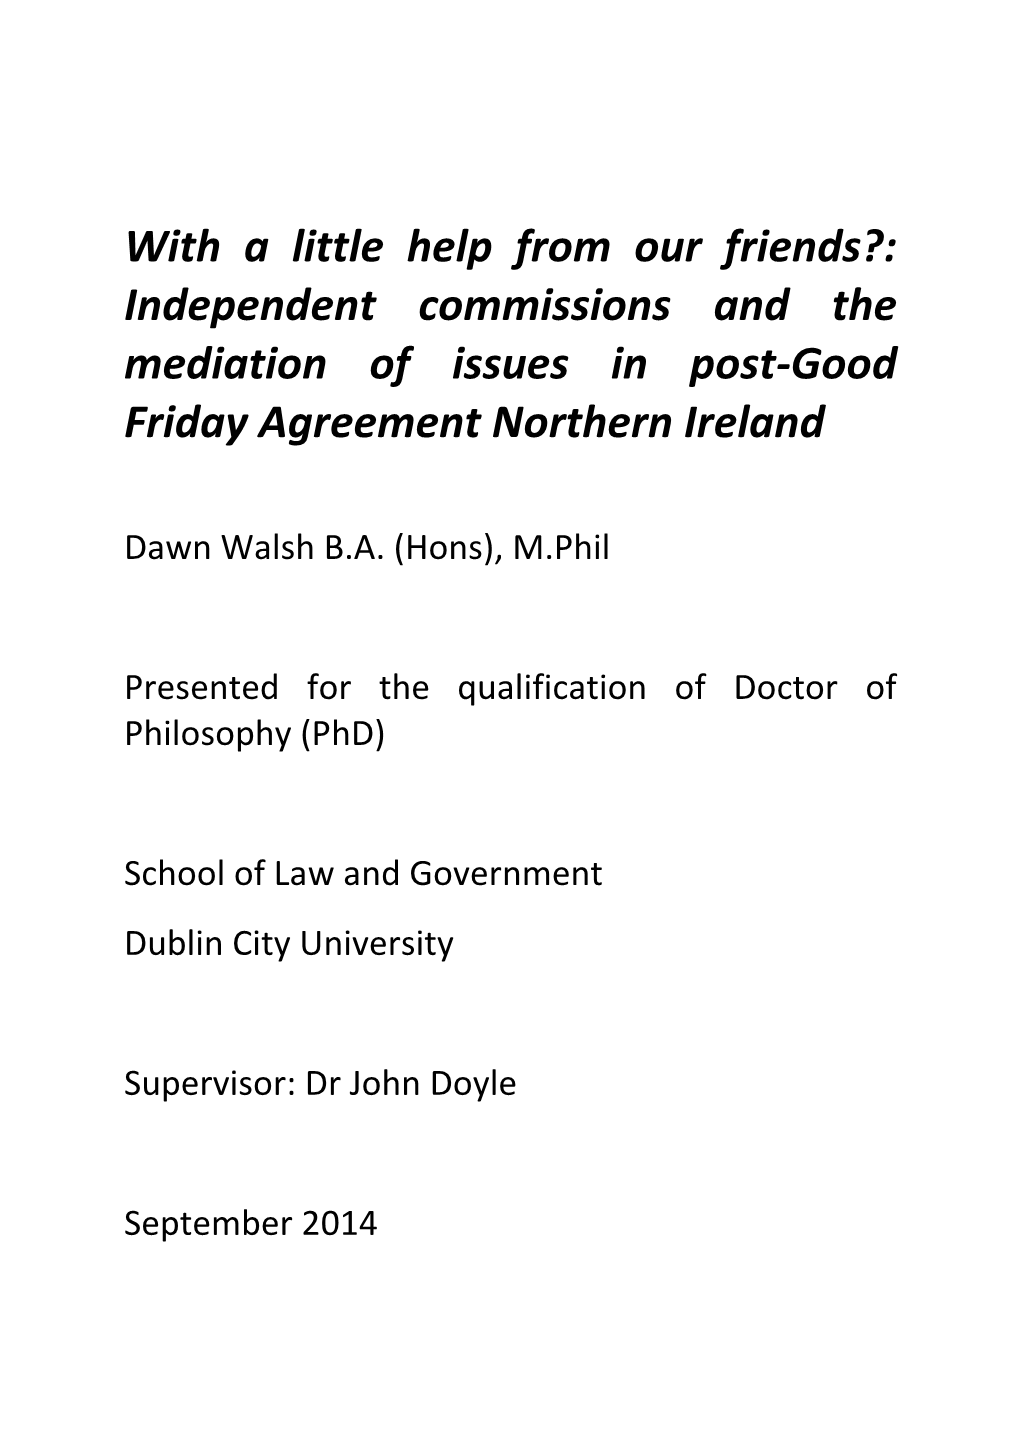 Independent Commissions and the Mediation of Issues in Post-Good Friday Agreement Northern Ireland